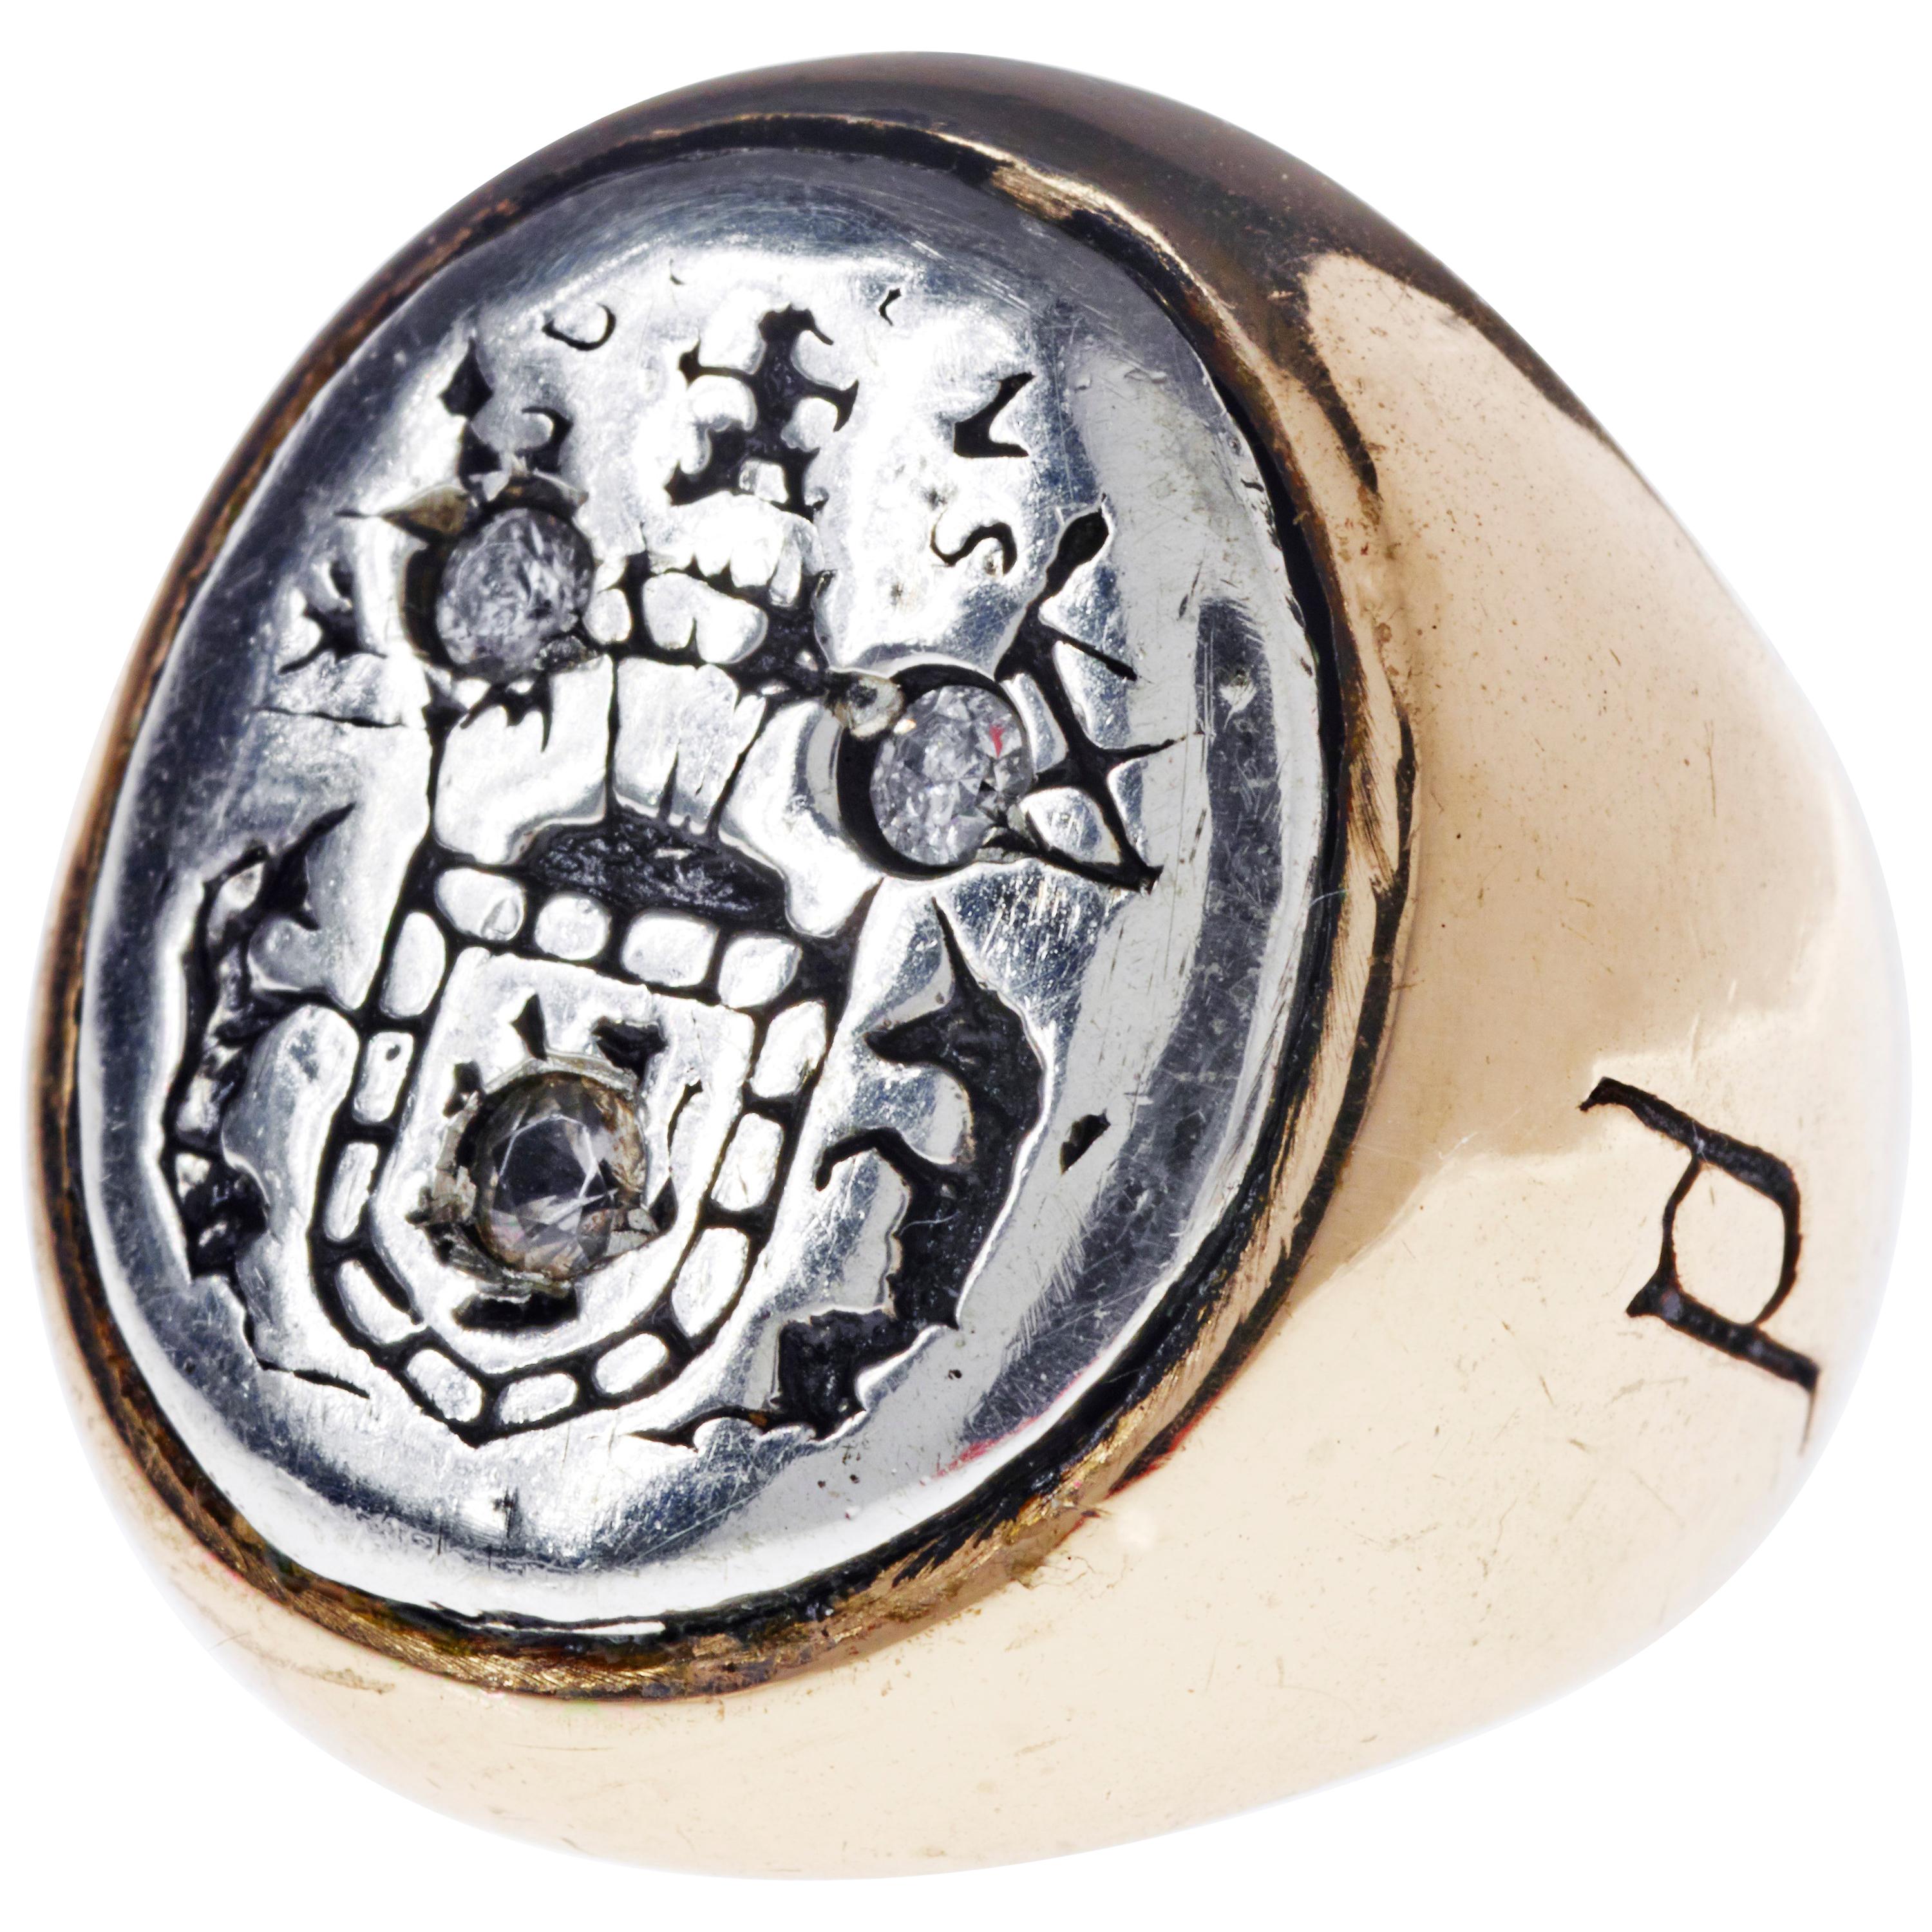 What is a crest ring?